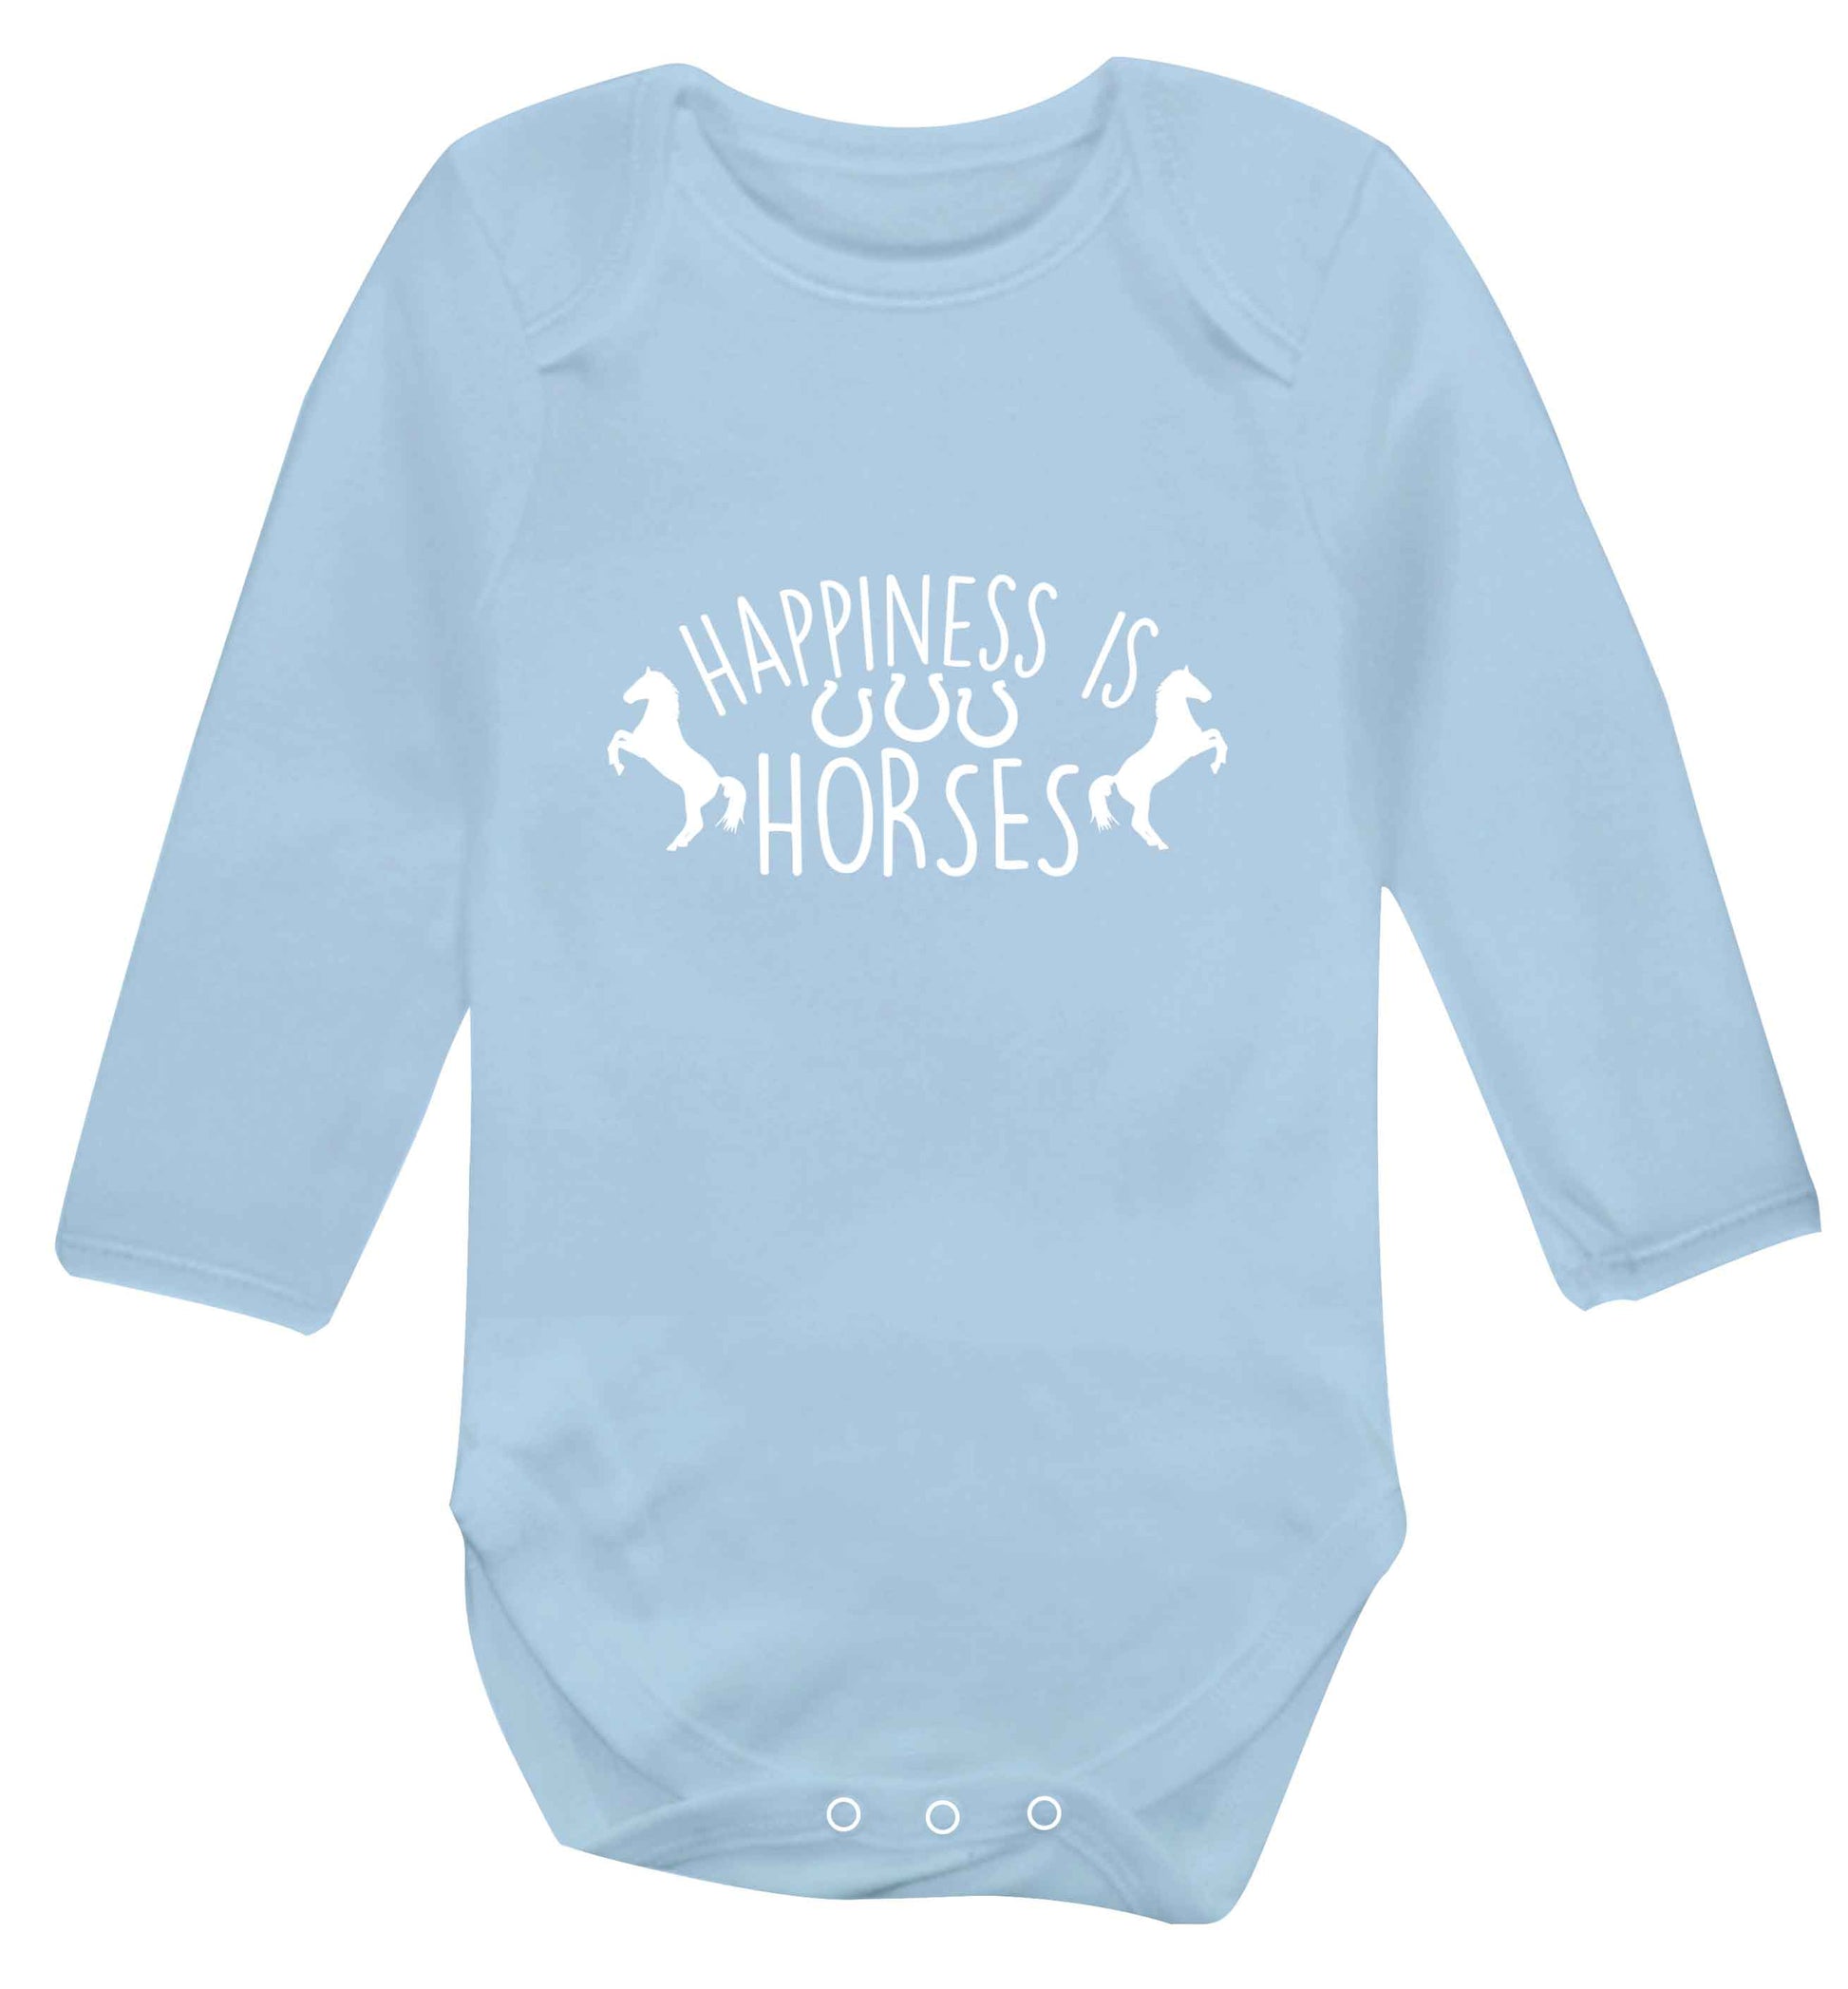 Happiness is horses baby vest long sleeved pale blue 6-12 months